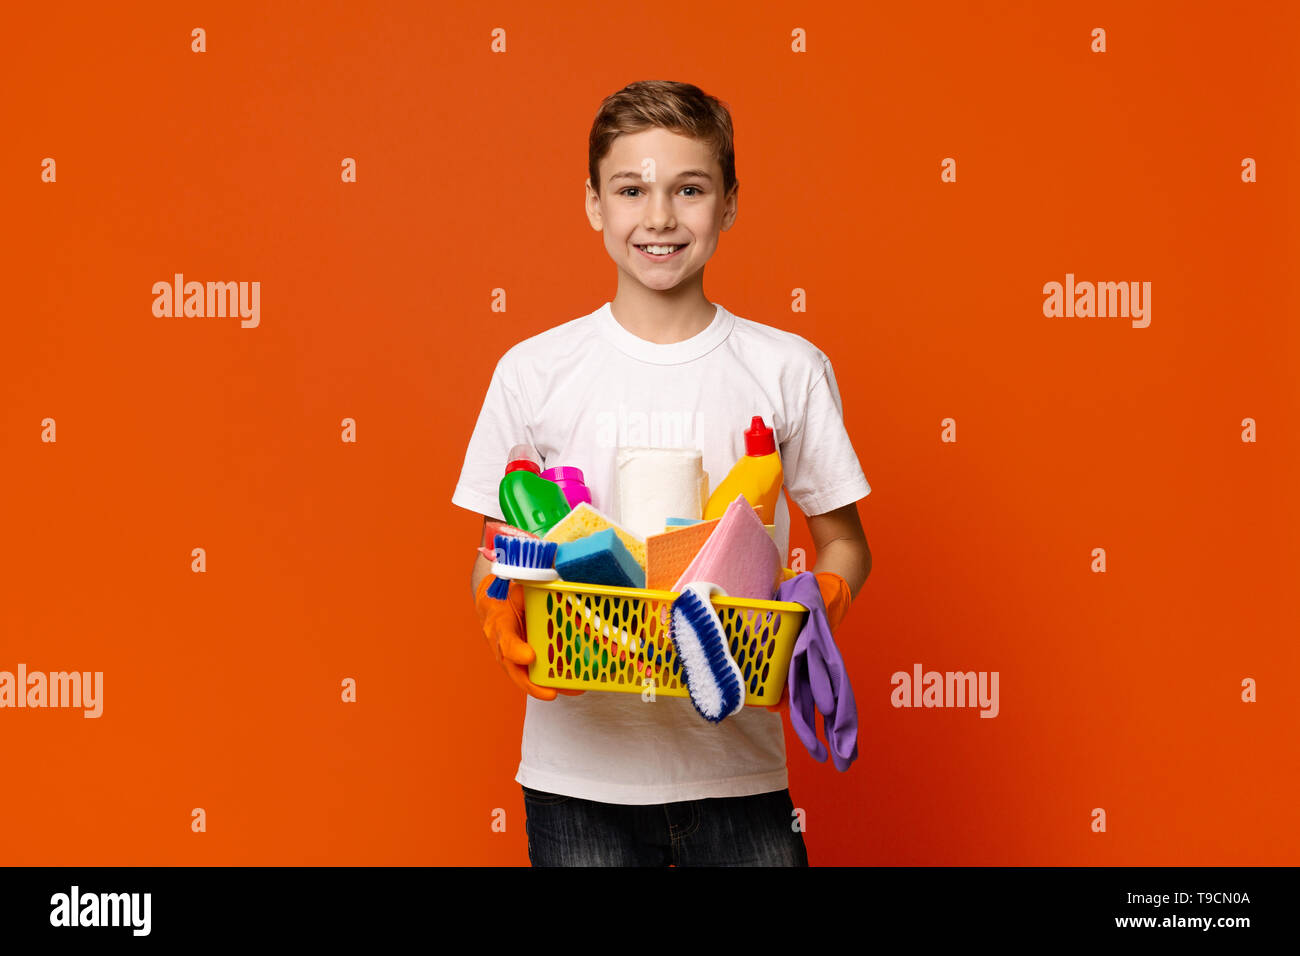 Cute boy holding set of cleaning supplies Stock Photo